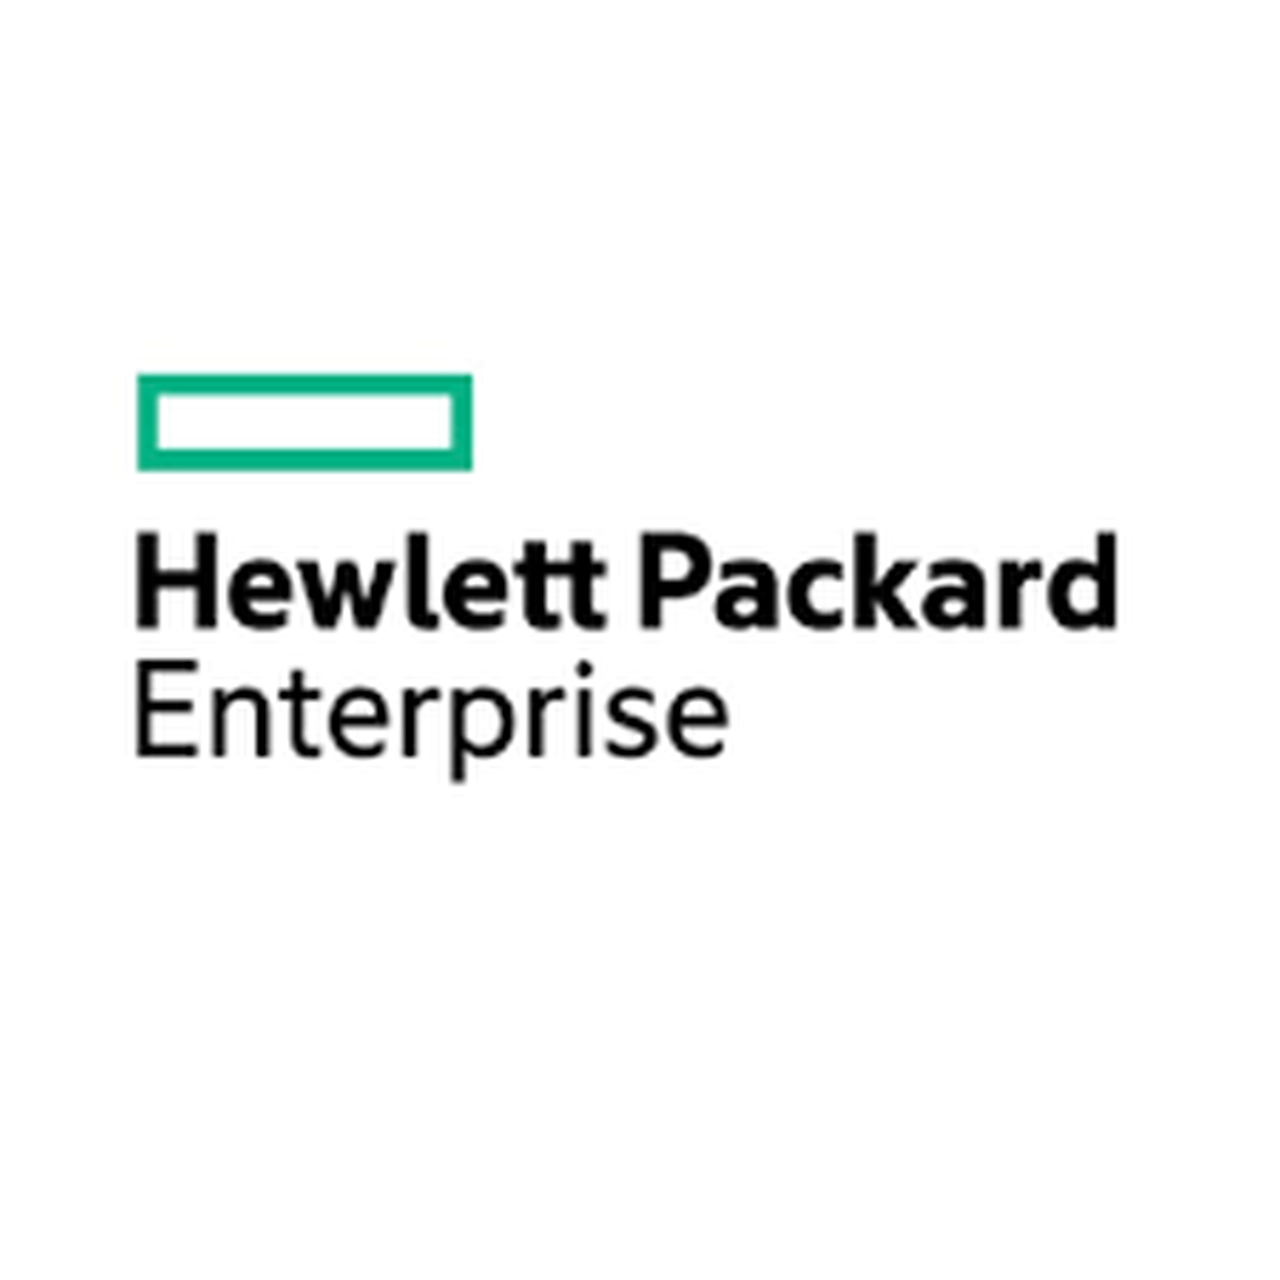 HPE 1 Year Post Warranty Foundation Care, Next Business Day DL380 G7 Service